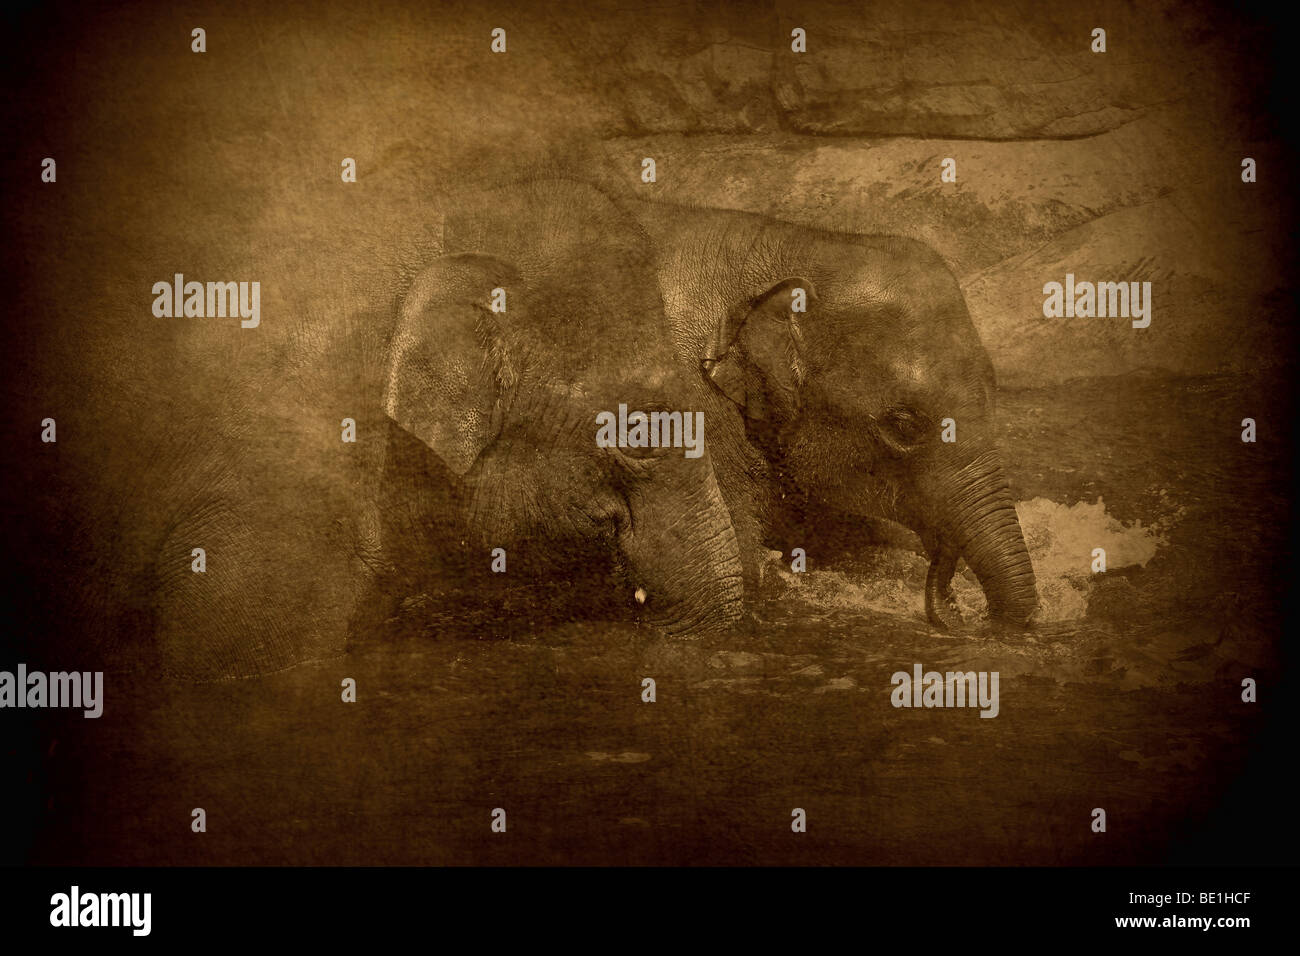 This is an antique type image of two elephants in water. The image is in sepia with textured layers added to create the finished Stock Photo